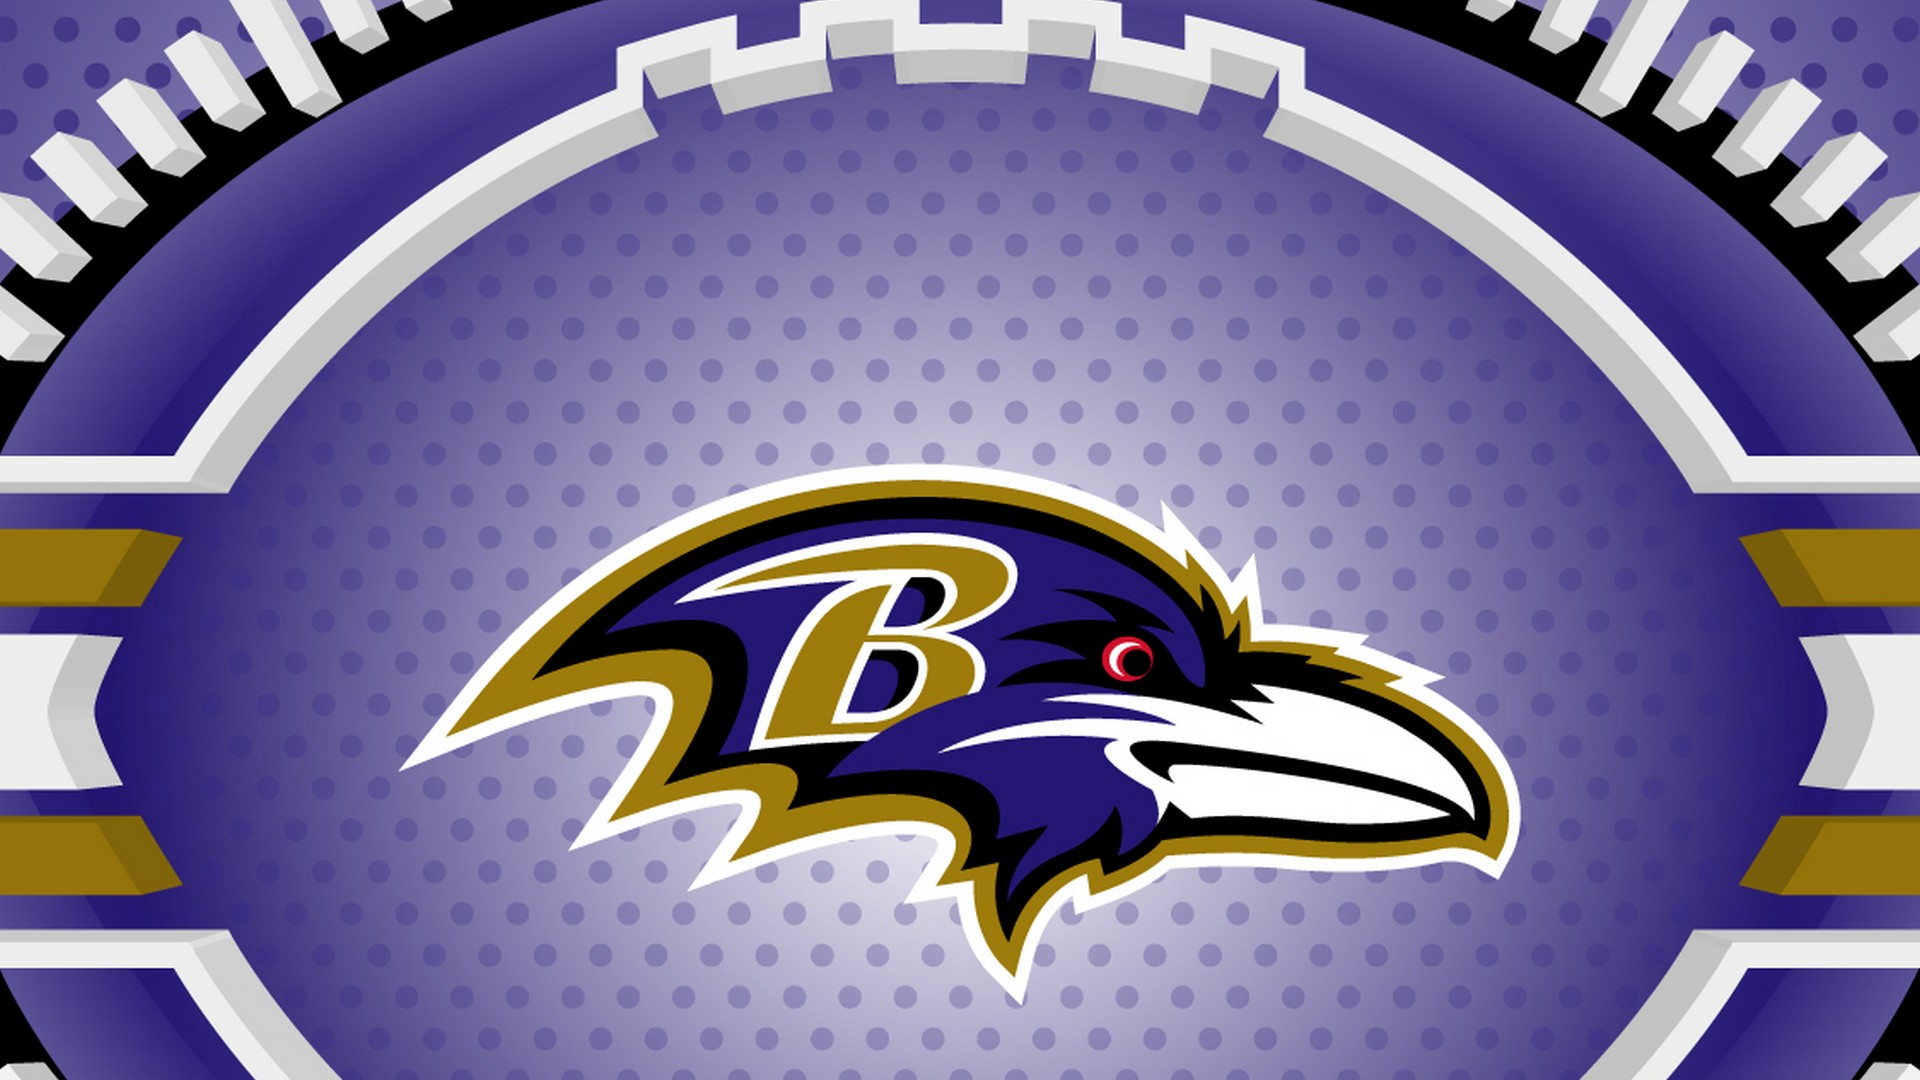 Baltimore Ravens Wallpaper For Mac Backgrounds 1920x1080